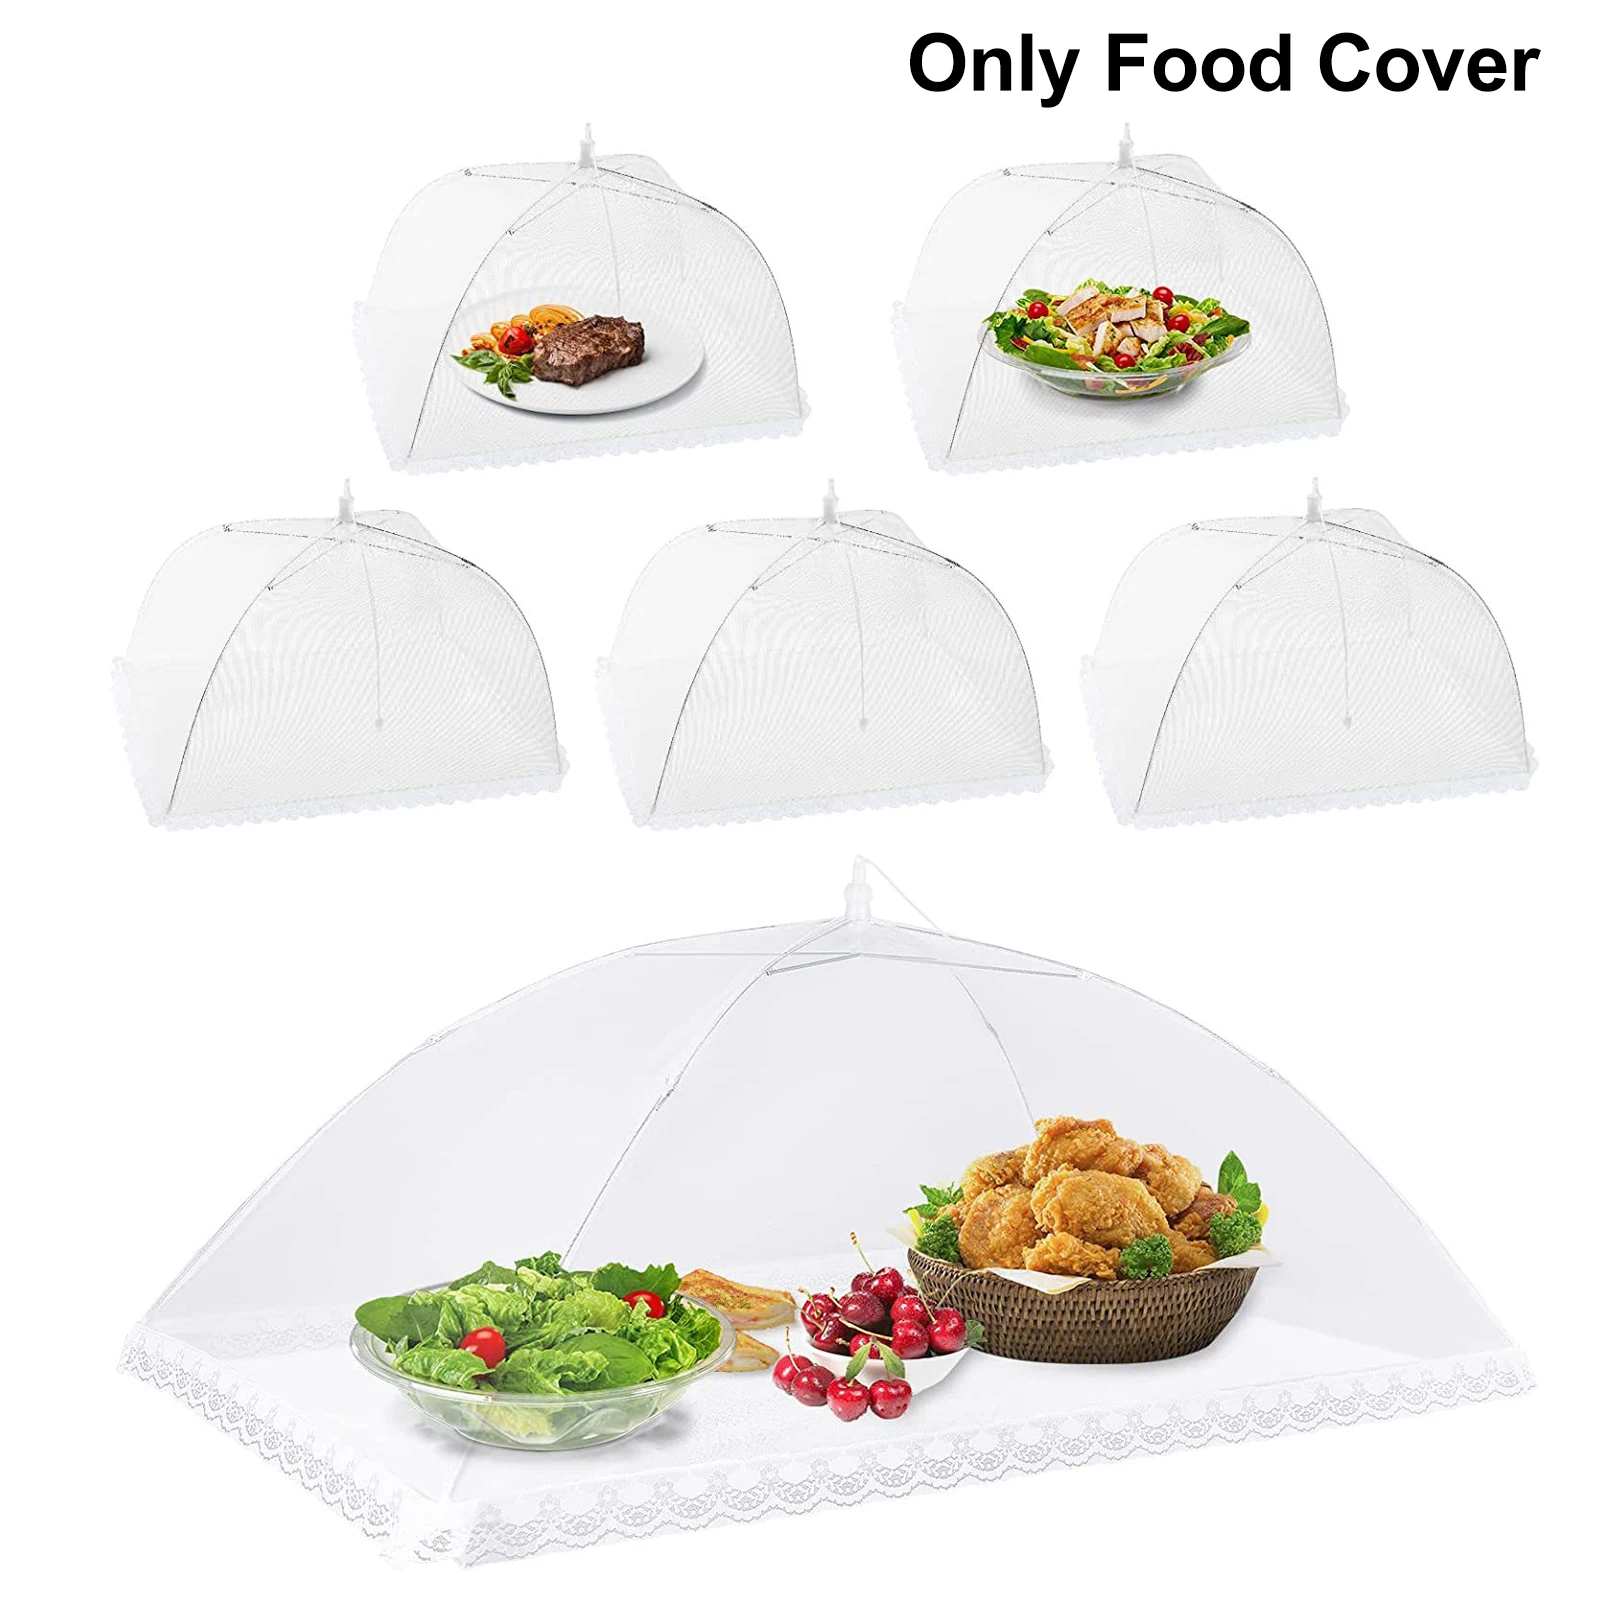 

6pcs Foldable Net Dome Tent Umbrella Camping Party Kitchen Indoor Outdoor Fine Mesh BBQ Reusable Food Cover Travel Washable